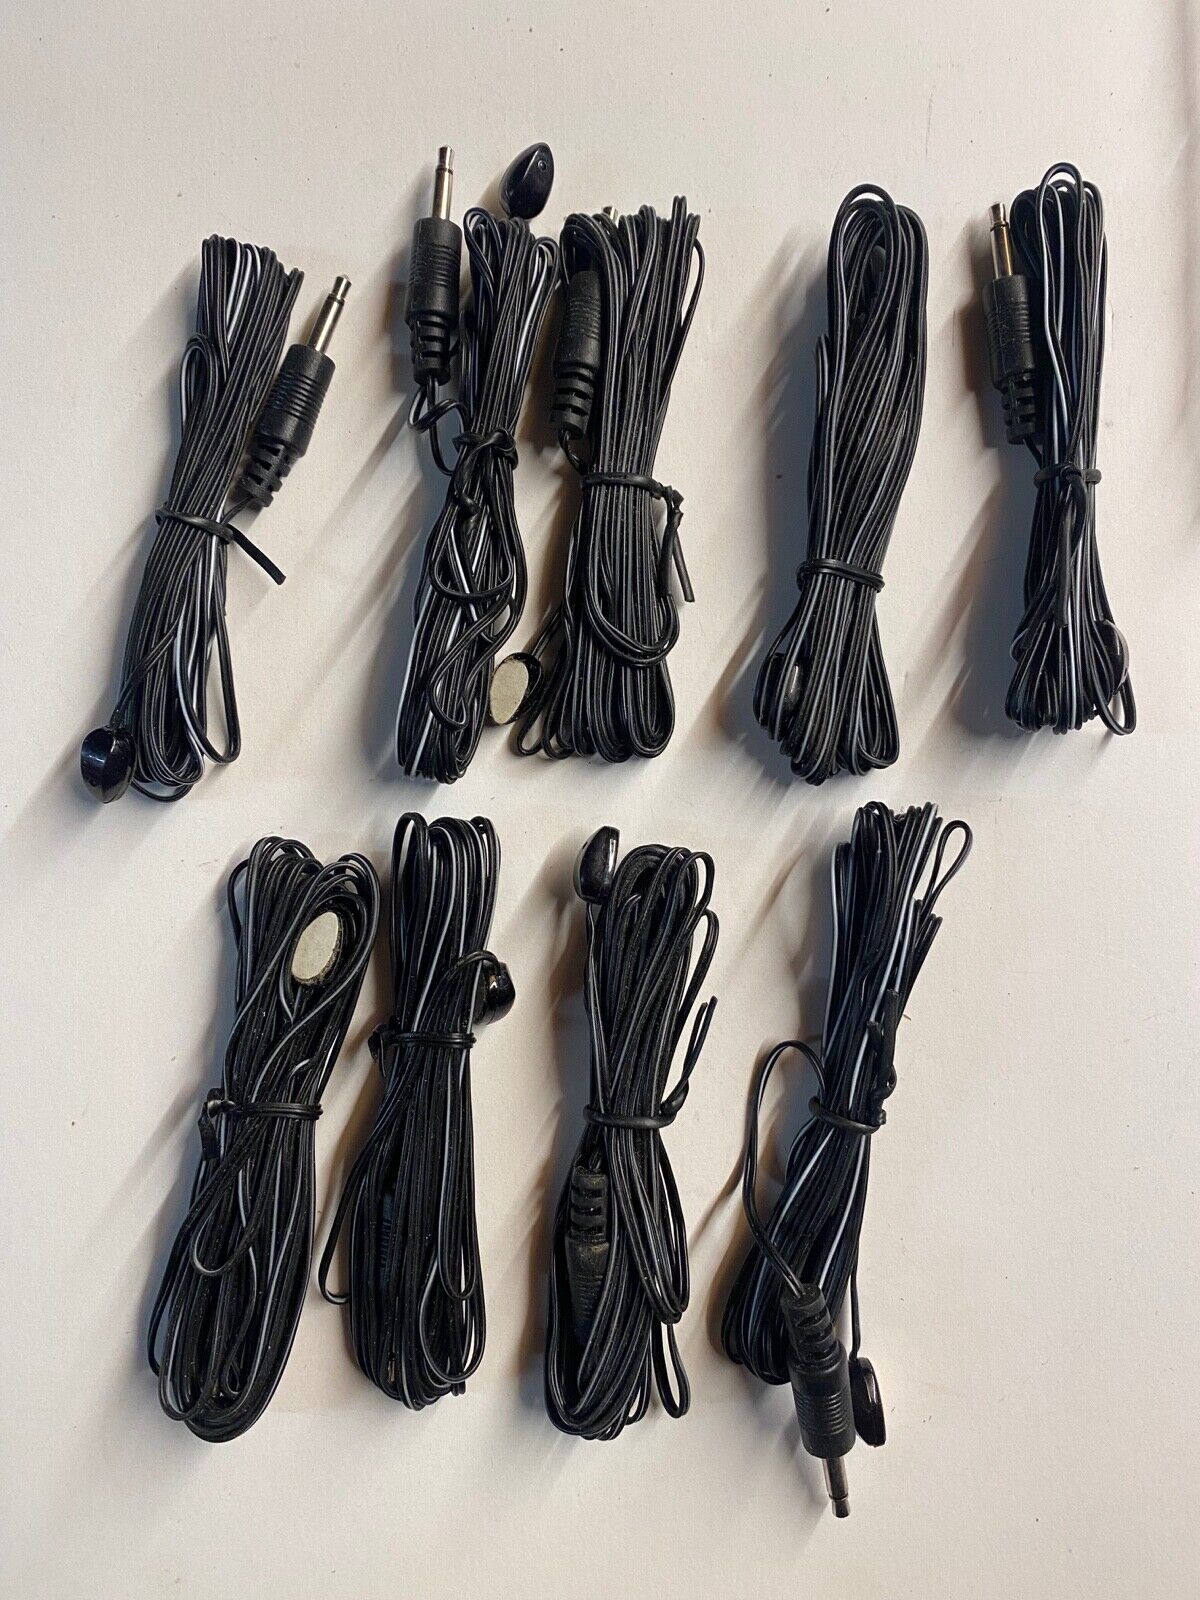 LOT of 9 Russound IR Micro Emitters 845.1 10 ft cable length IR Eye IR Emmitter RUSSOUND 845.1